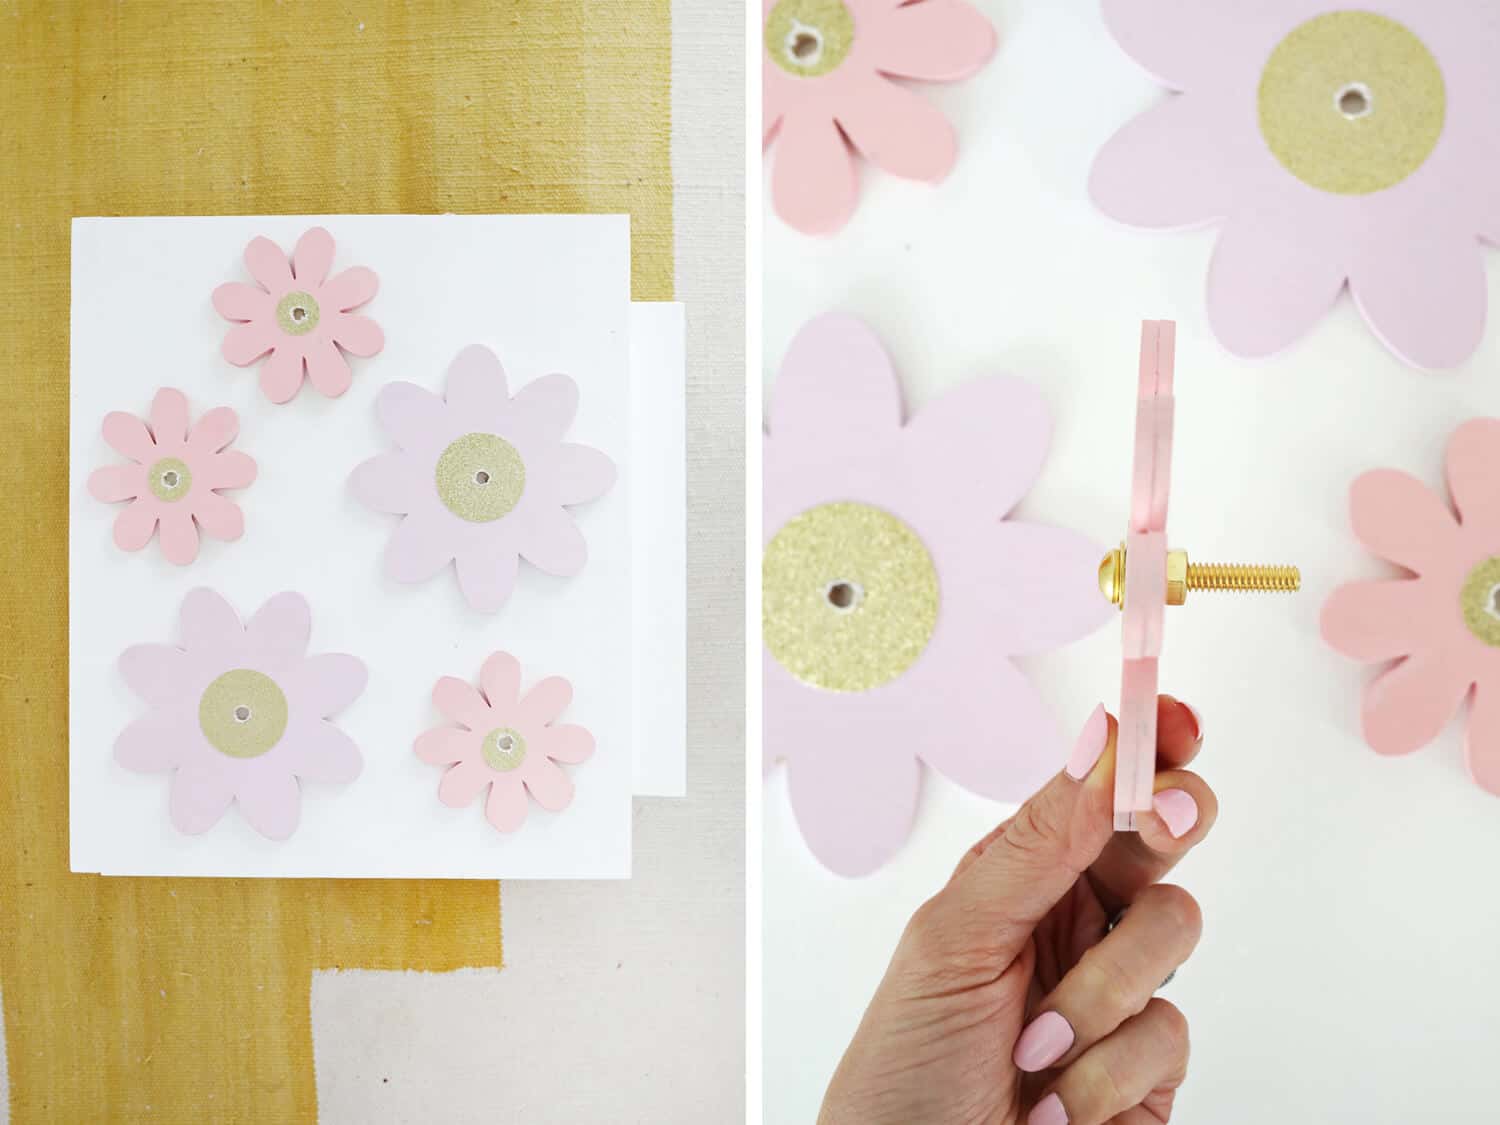 4 painted wooden flowers with drilled holes in center